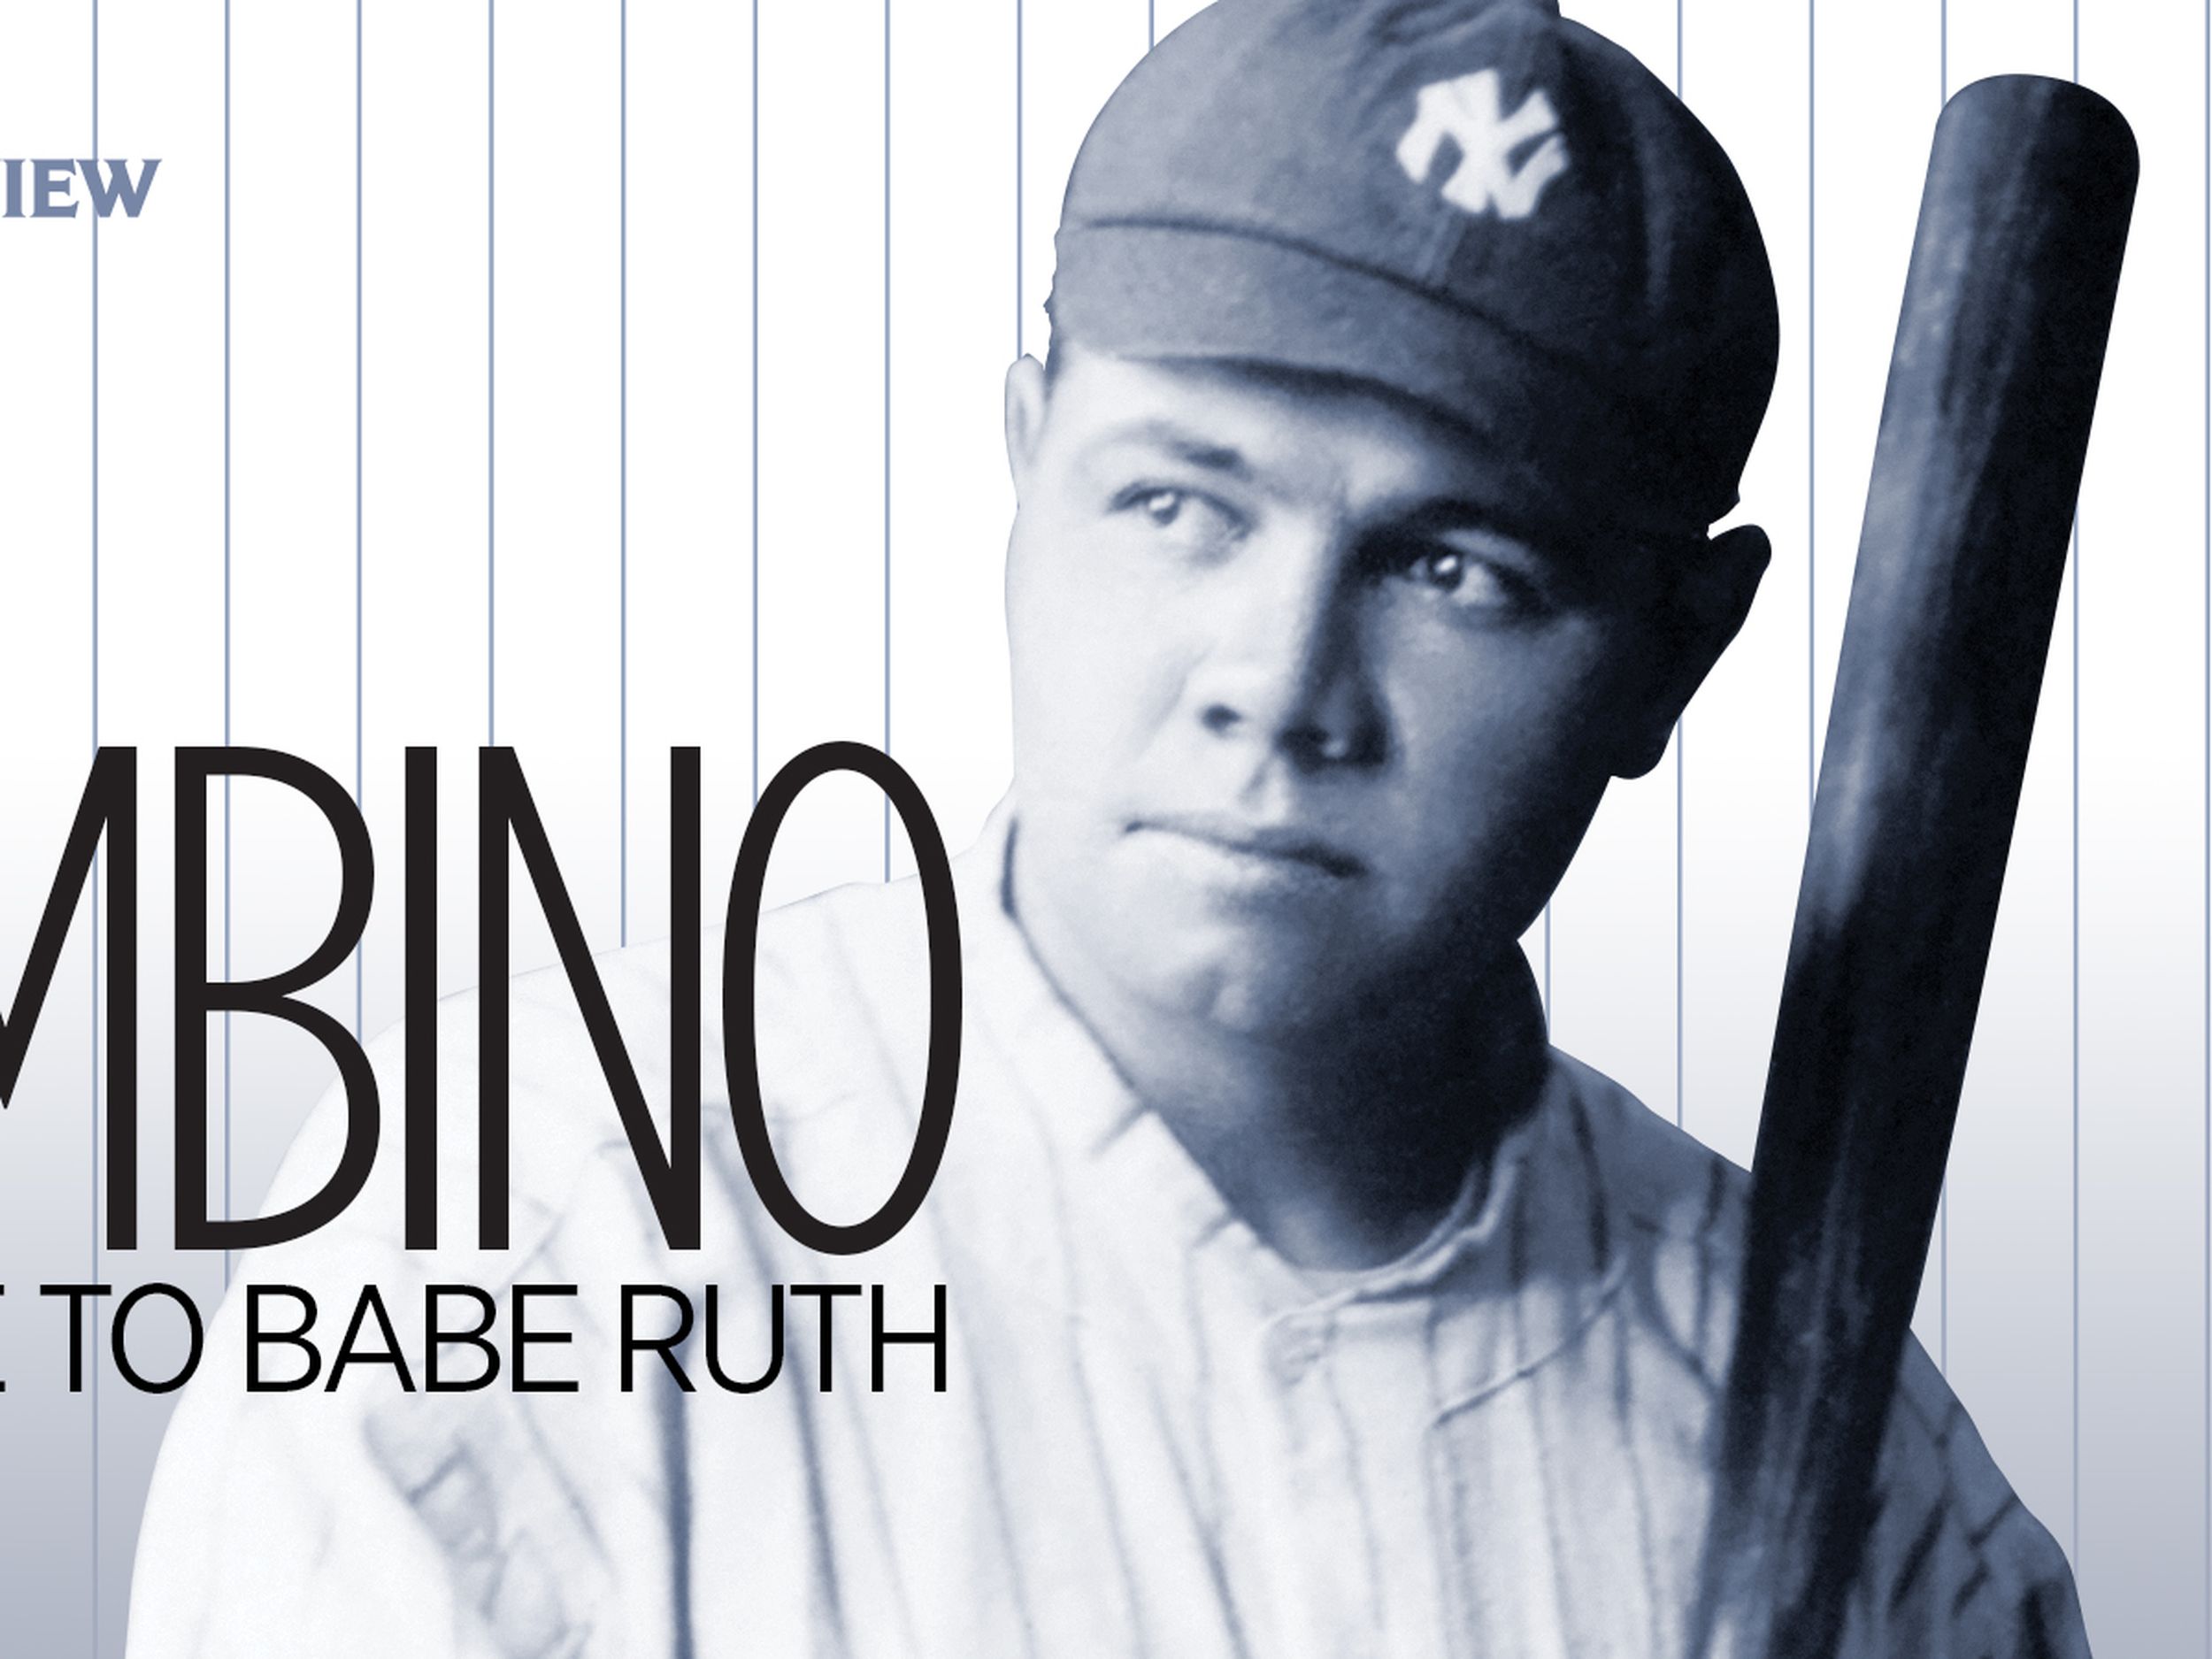 Curse of the Bambino!: The Boston Red Sox in the 2004 - Apple Books